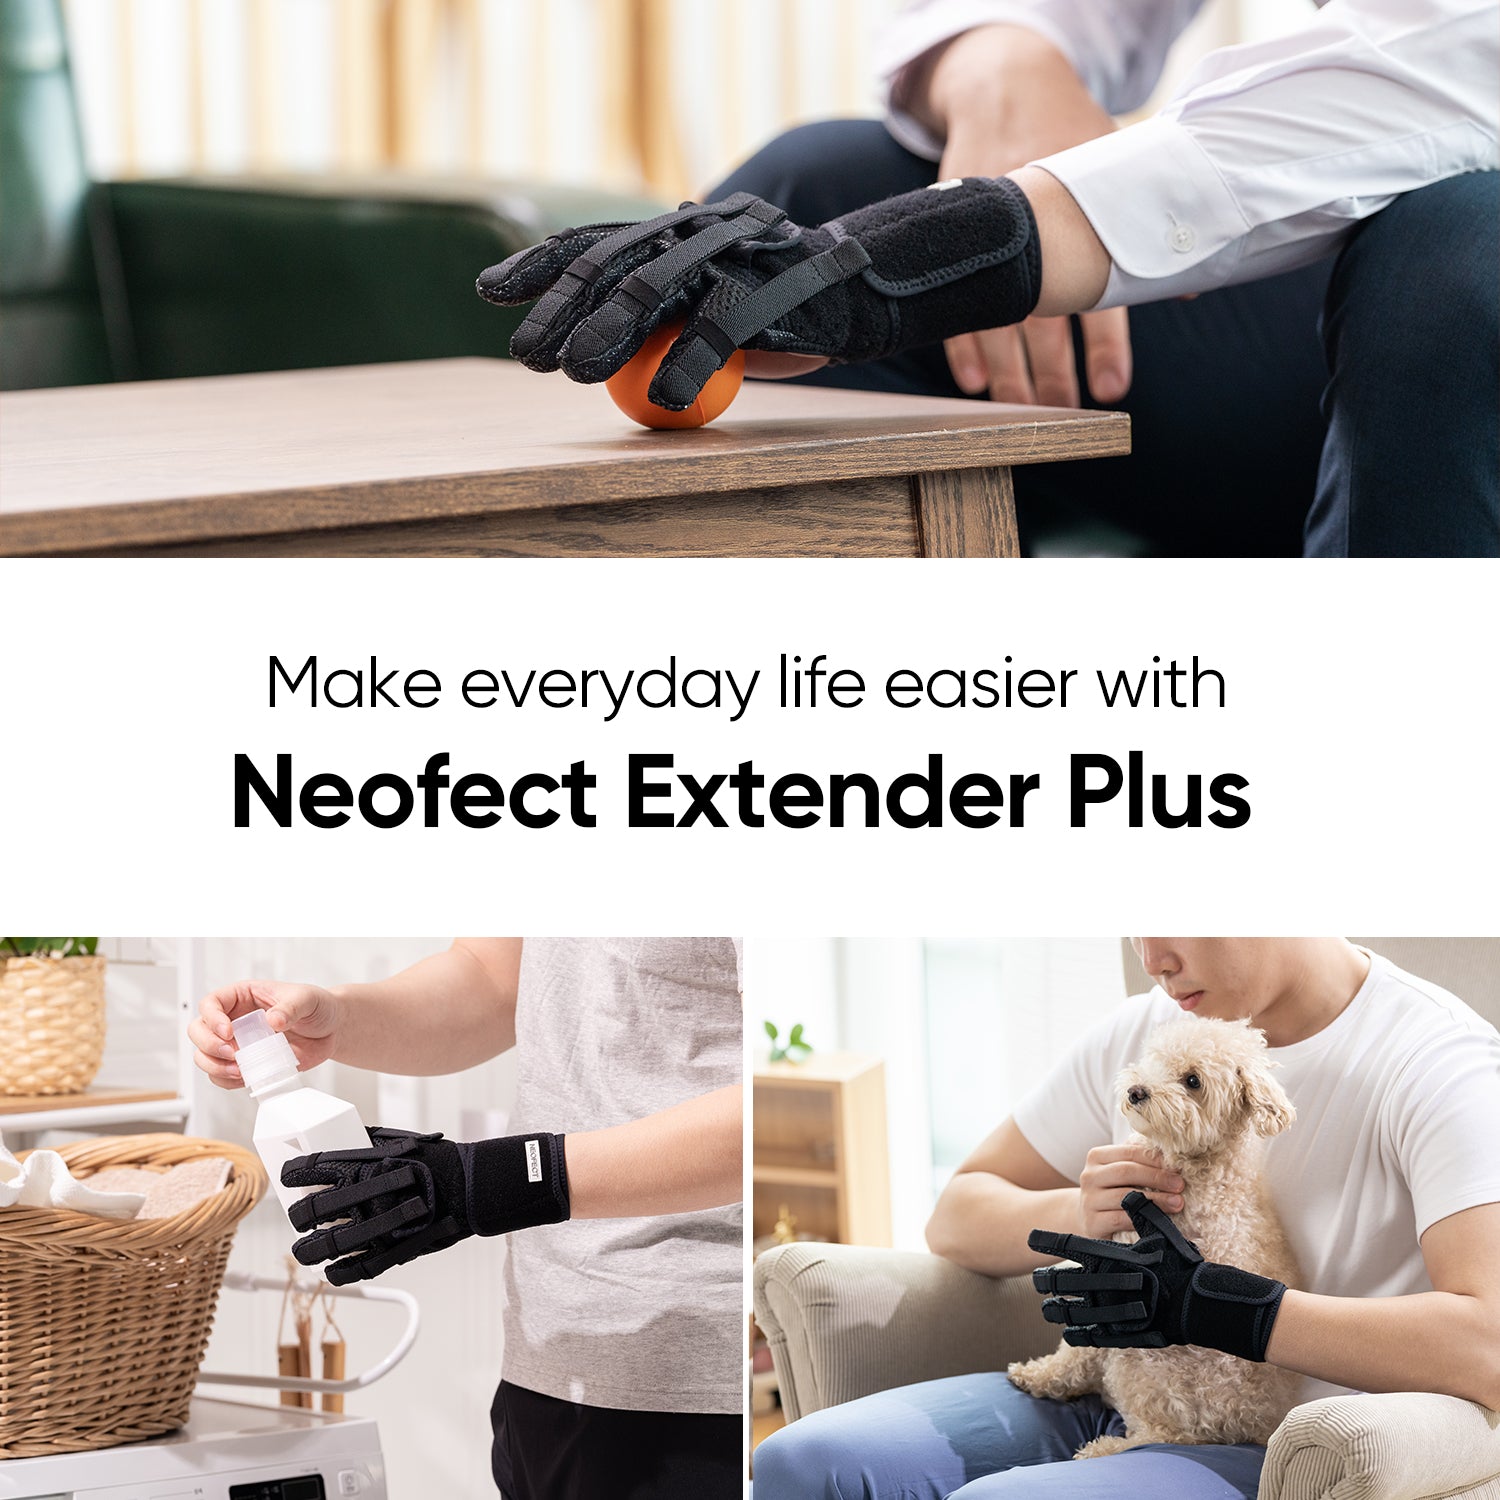 Neofect Extender Plus